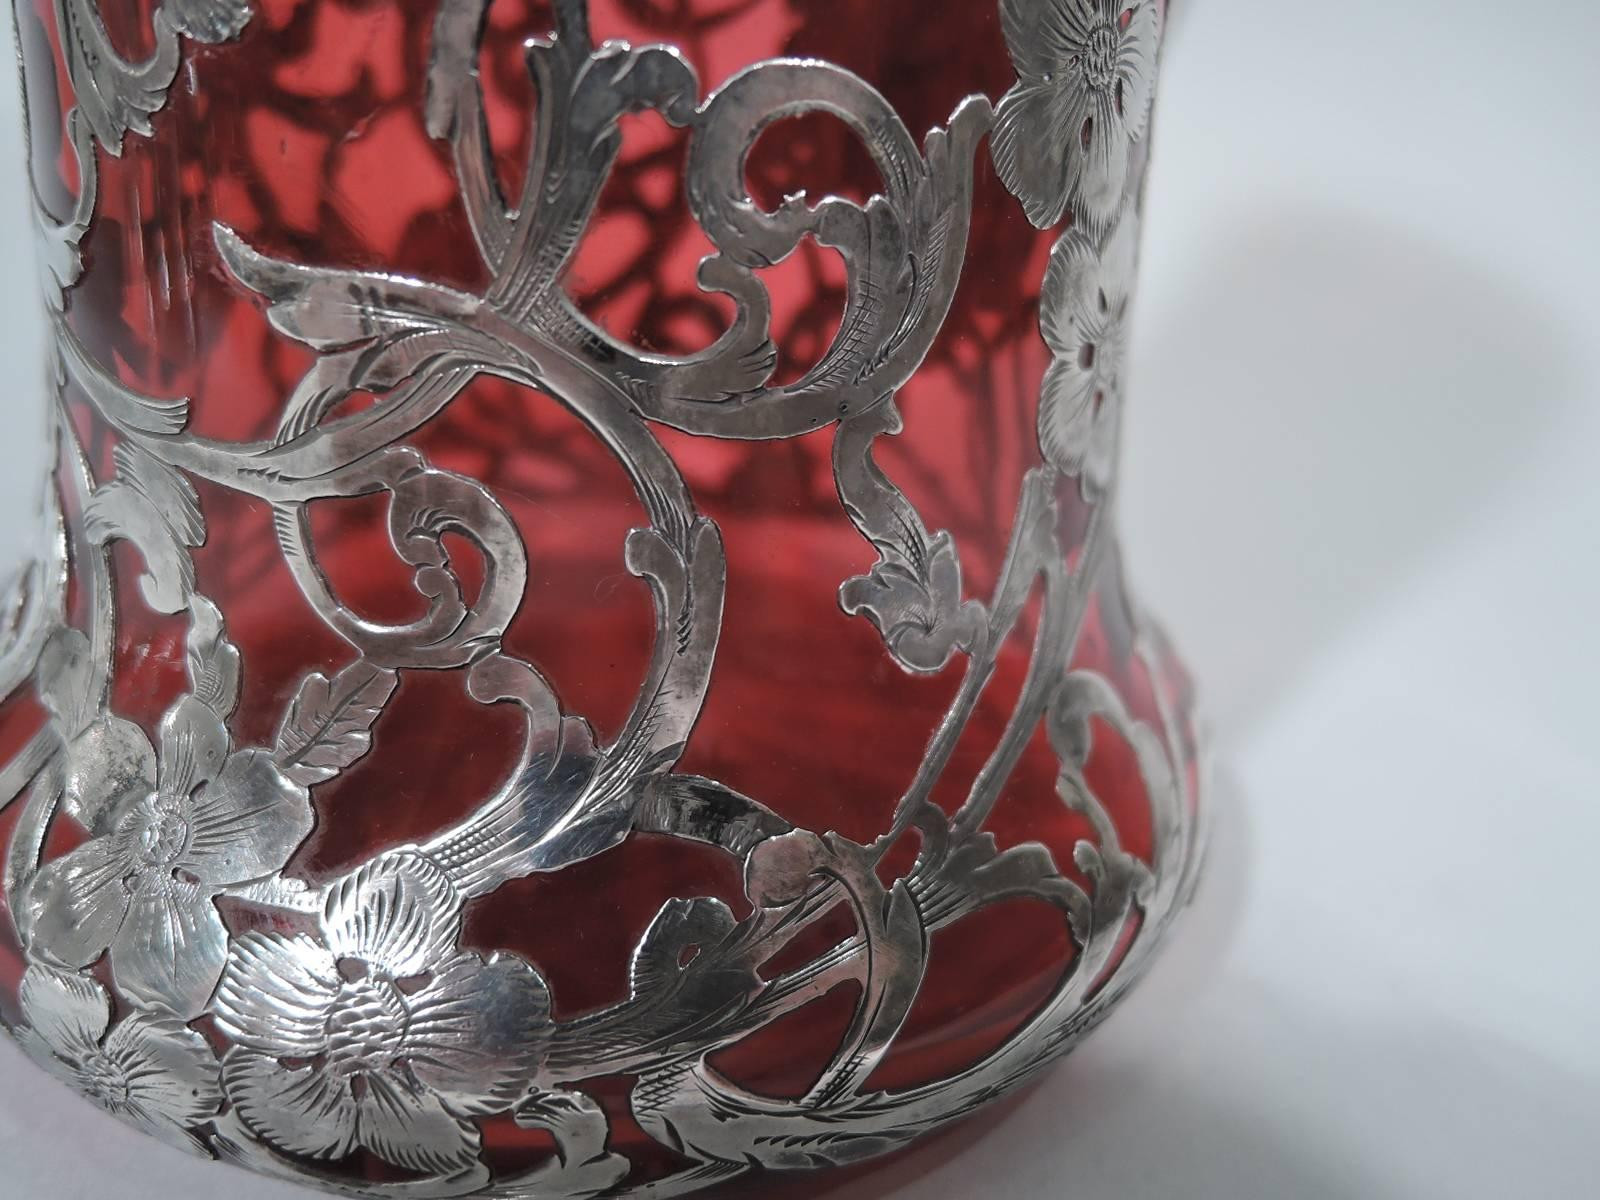 30 Fabulous Antique Red Glass Vase 2024 free download antique red glass vase of american art nouveau ruby red glass claret jug with silver overlay intended for american art nouveau ruby red glass claret jug with silver overlay at 1stdibs